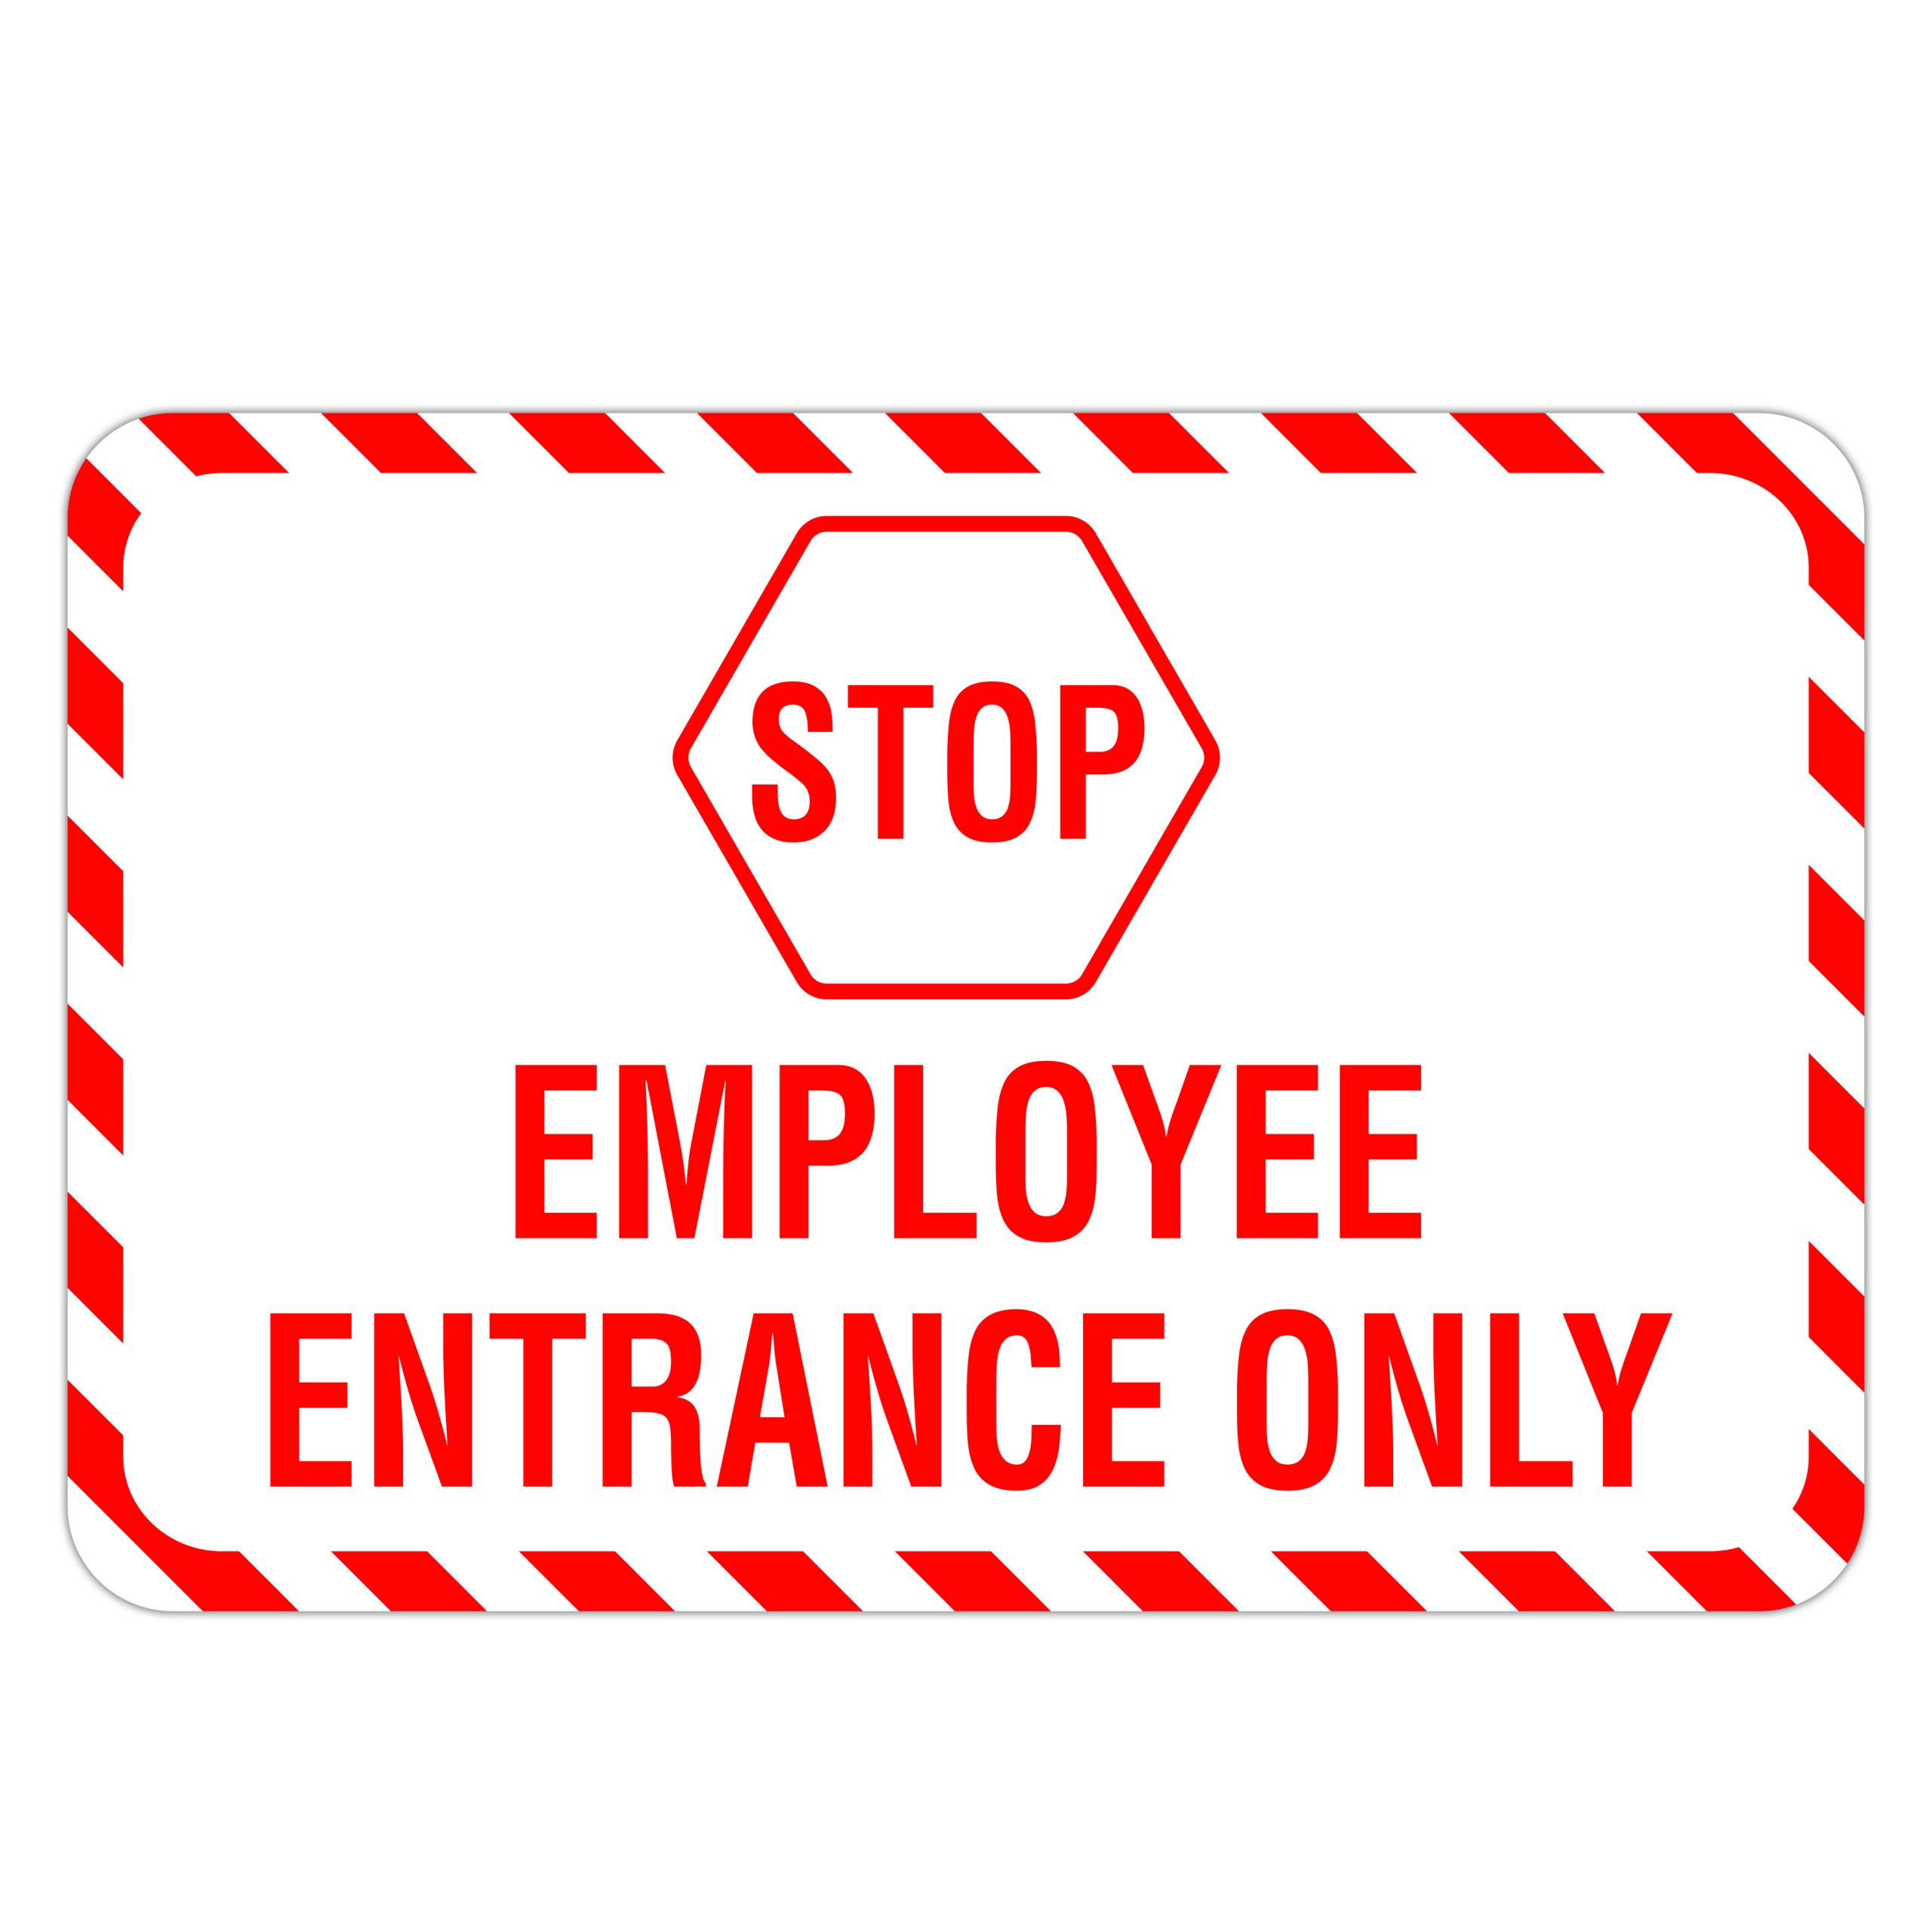 Employees Only Sign Printable Printabletemplates - vrogue.co